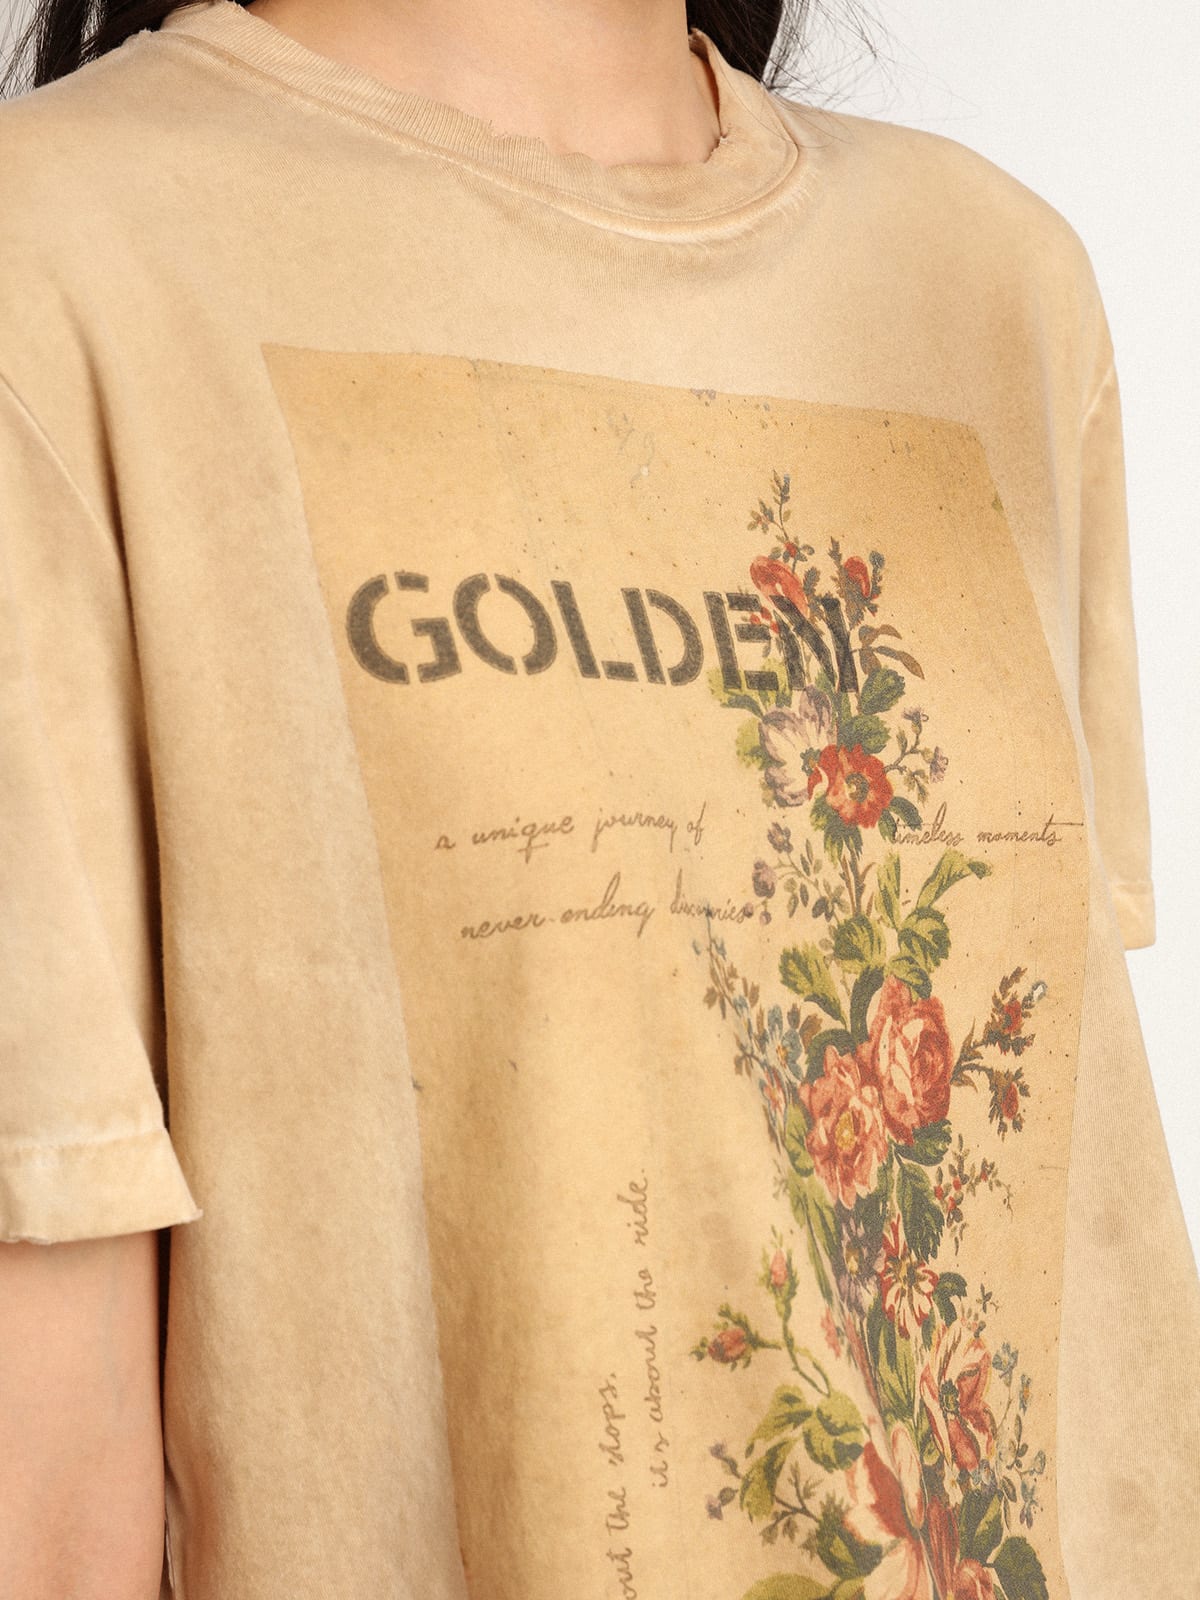 Golden Goose - Women's bone white T-shirt with floral print in 